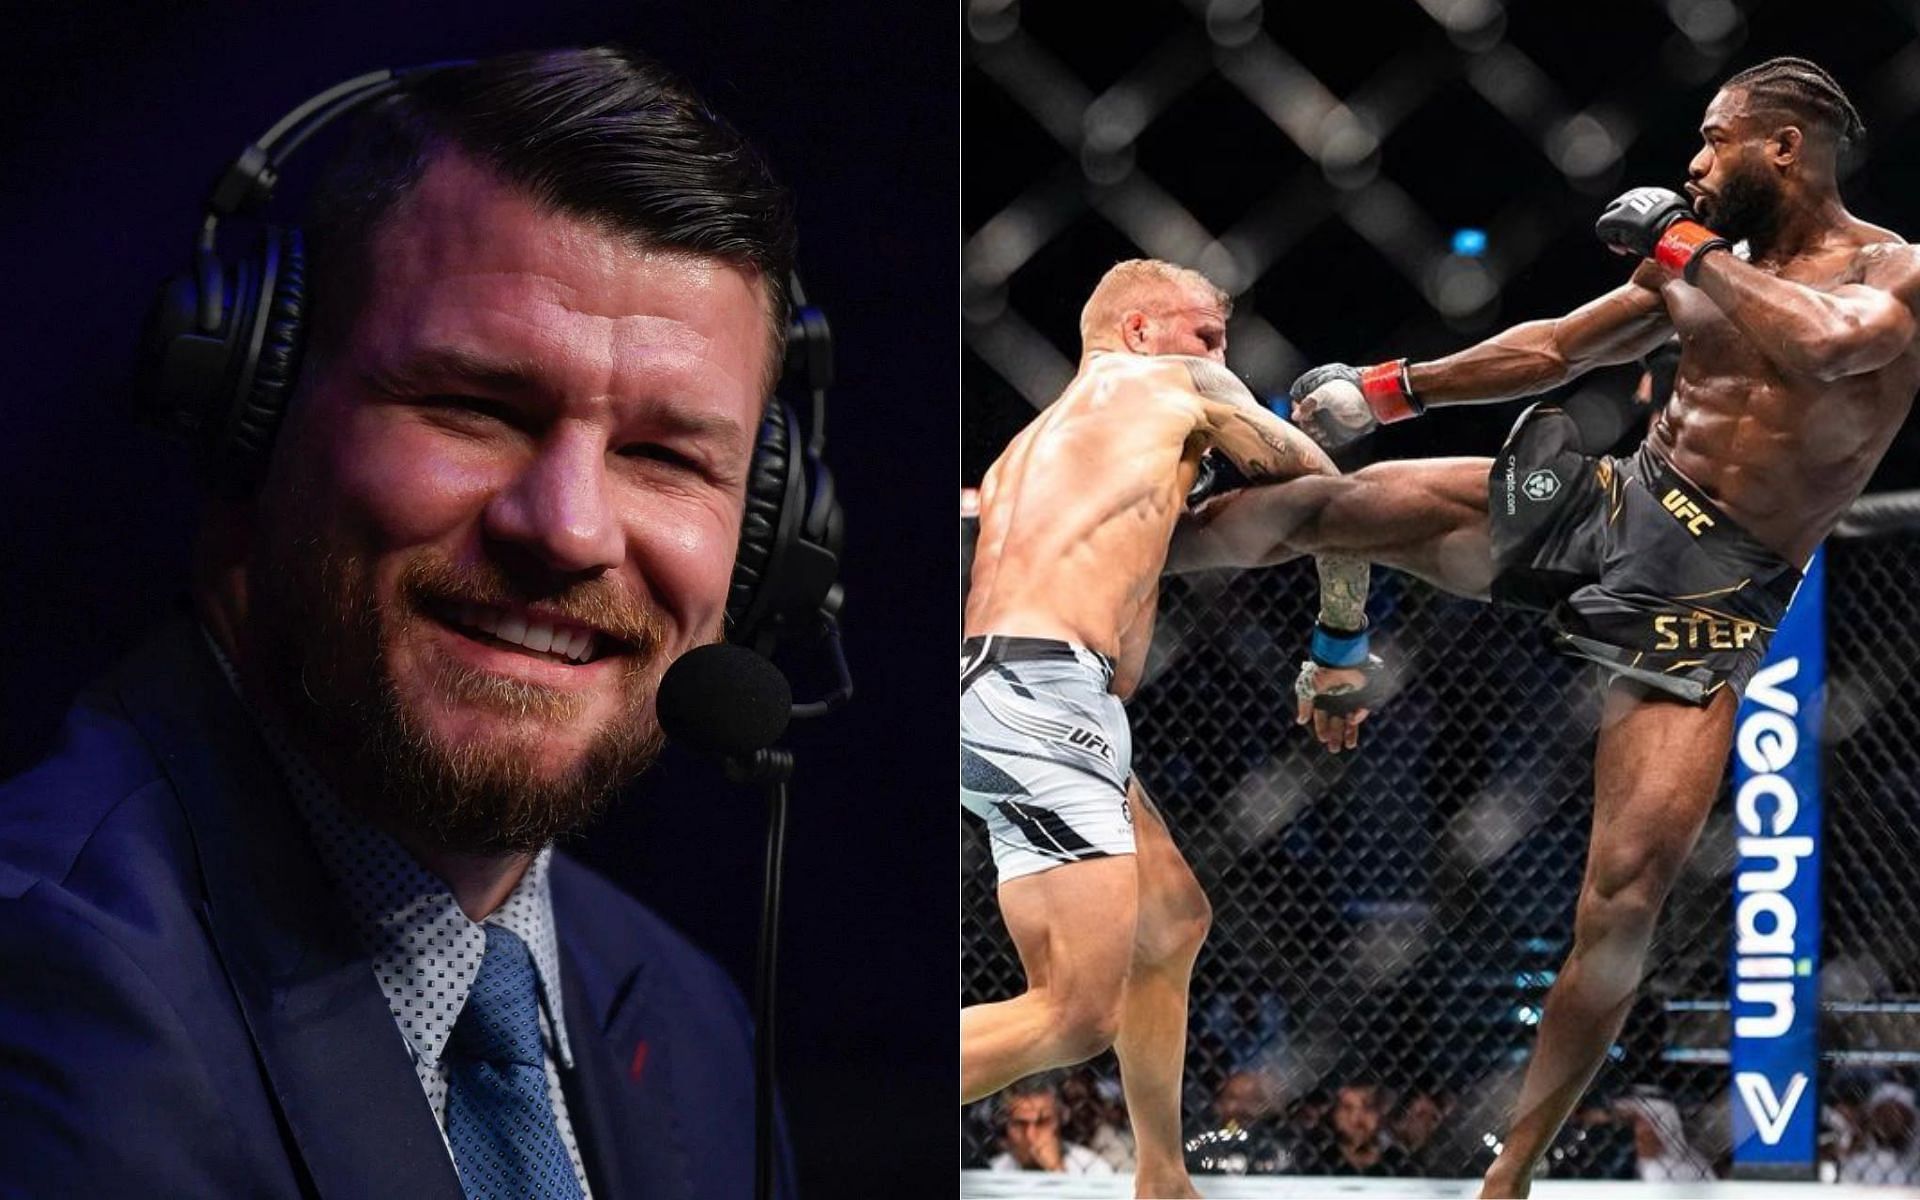 Michael Bisping (left) and Aljamain Sterling vs. T.J. Dillashaw (right) {image credits: funkmastermma on Instagram]